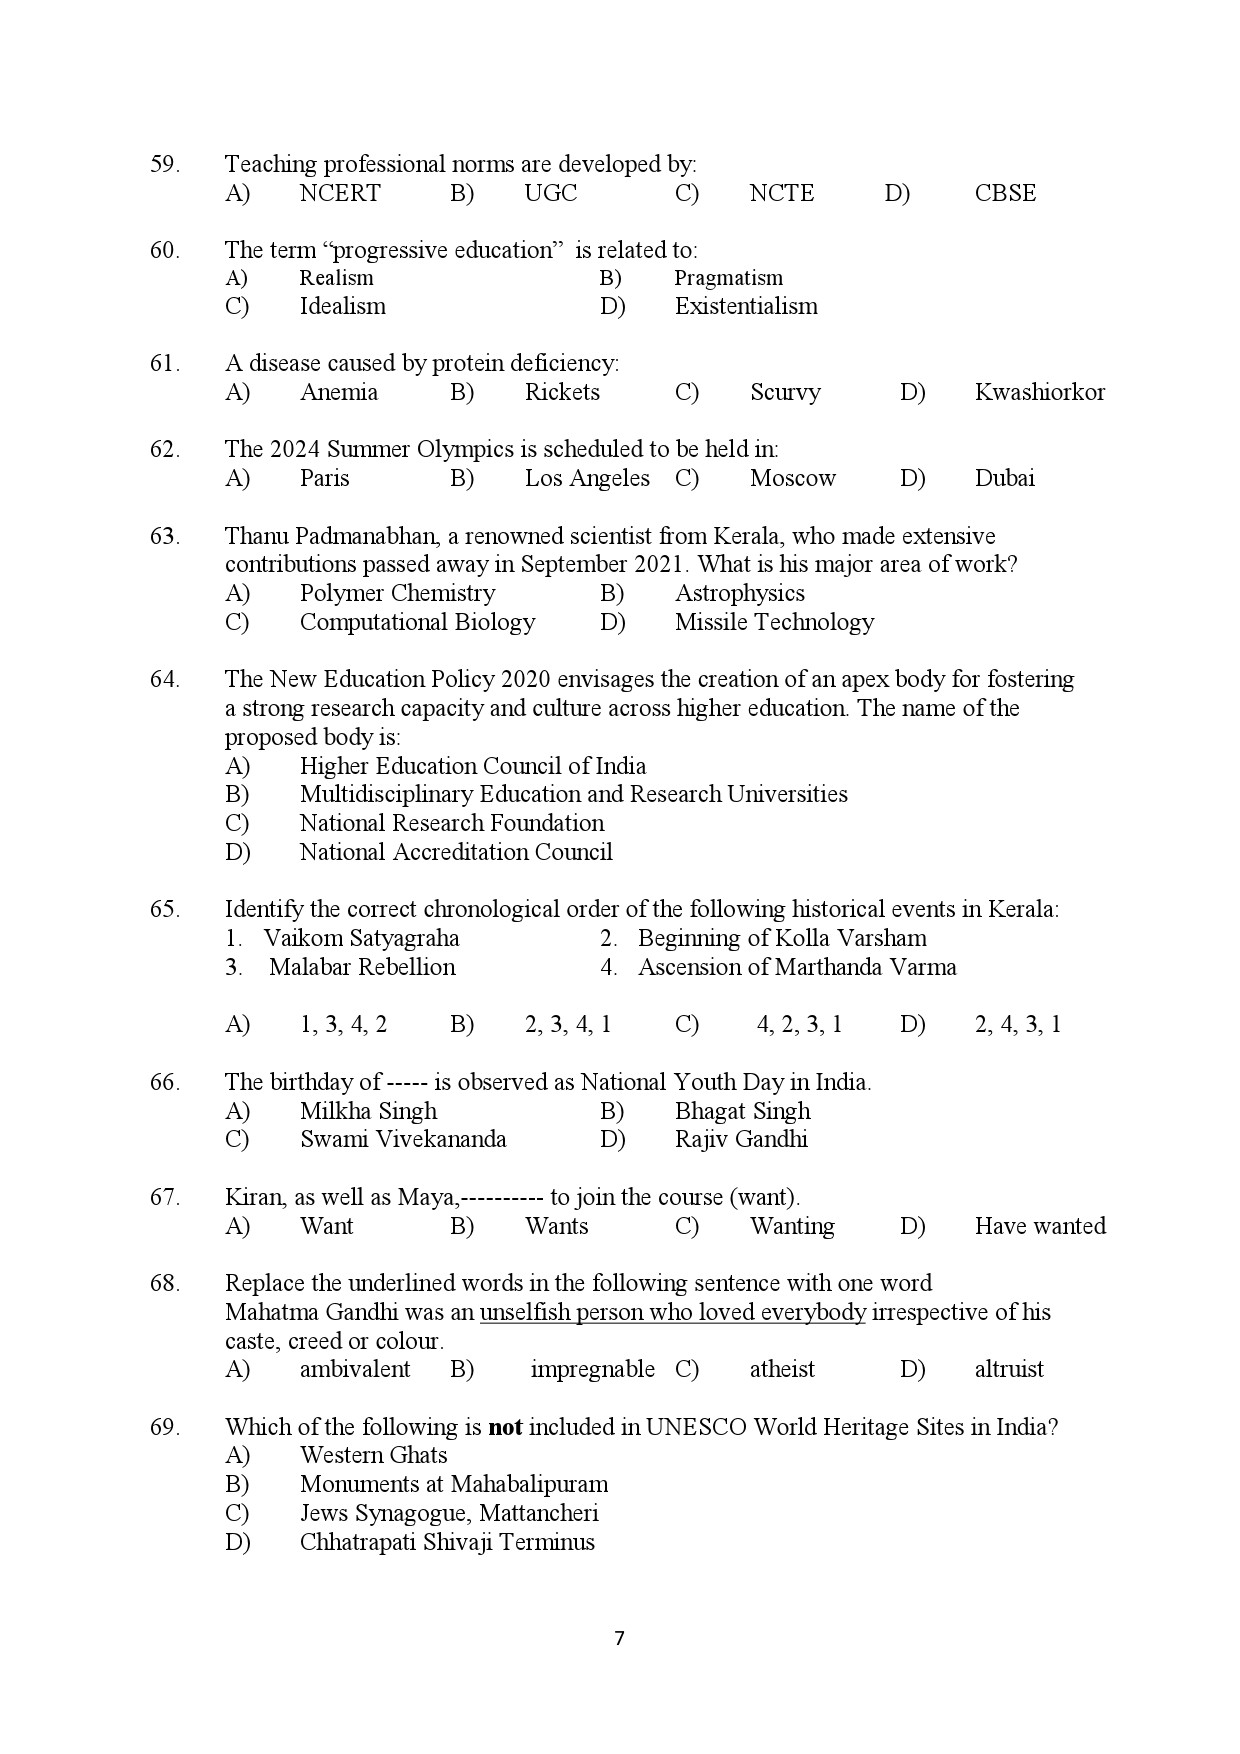 Kerala SET General Knowledge Exam Question Paper January 2022 7